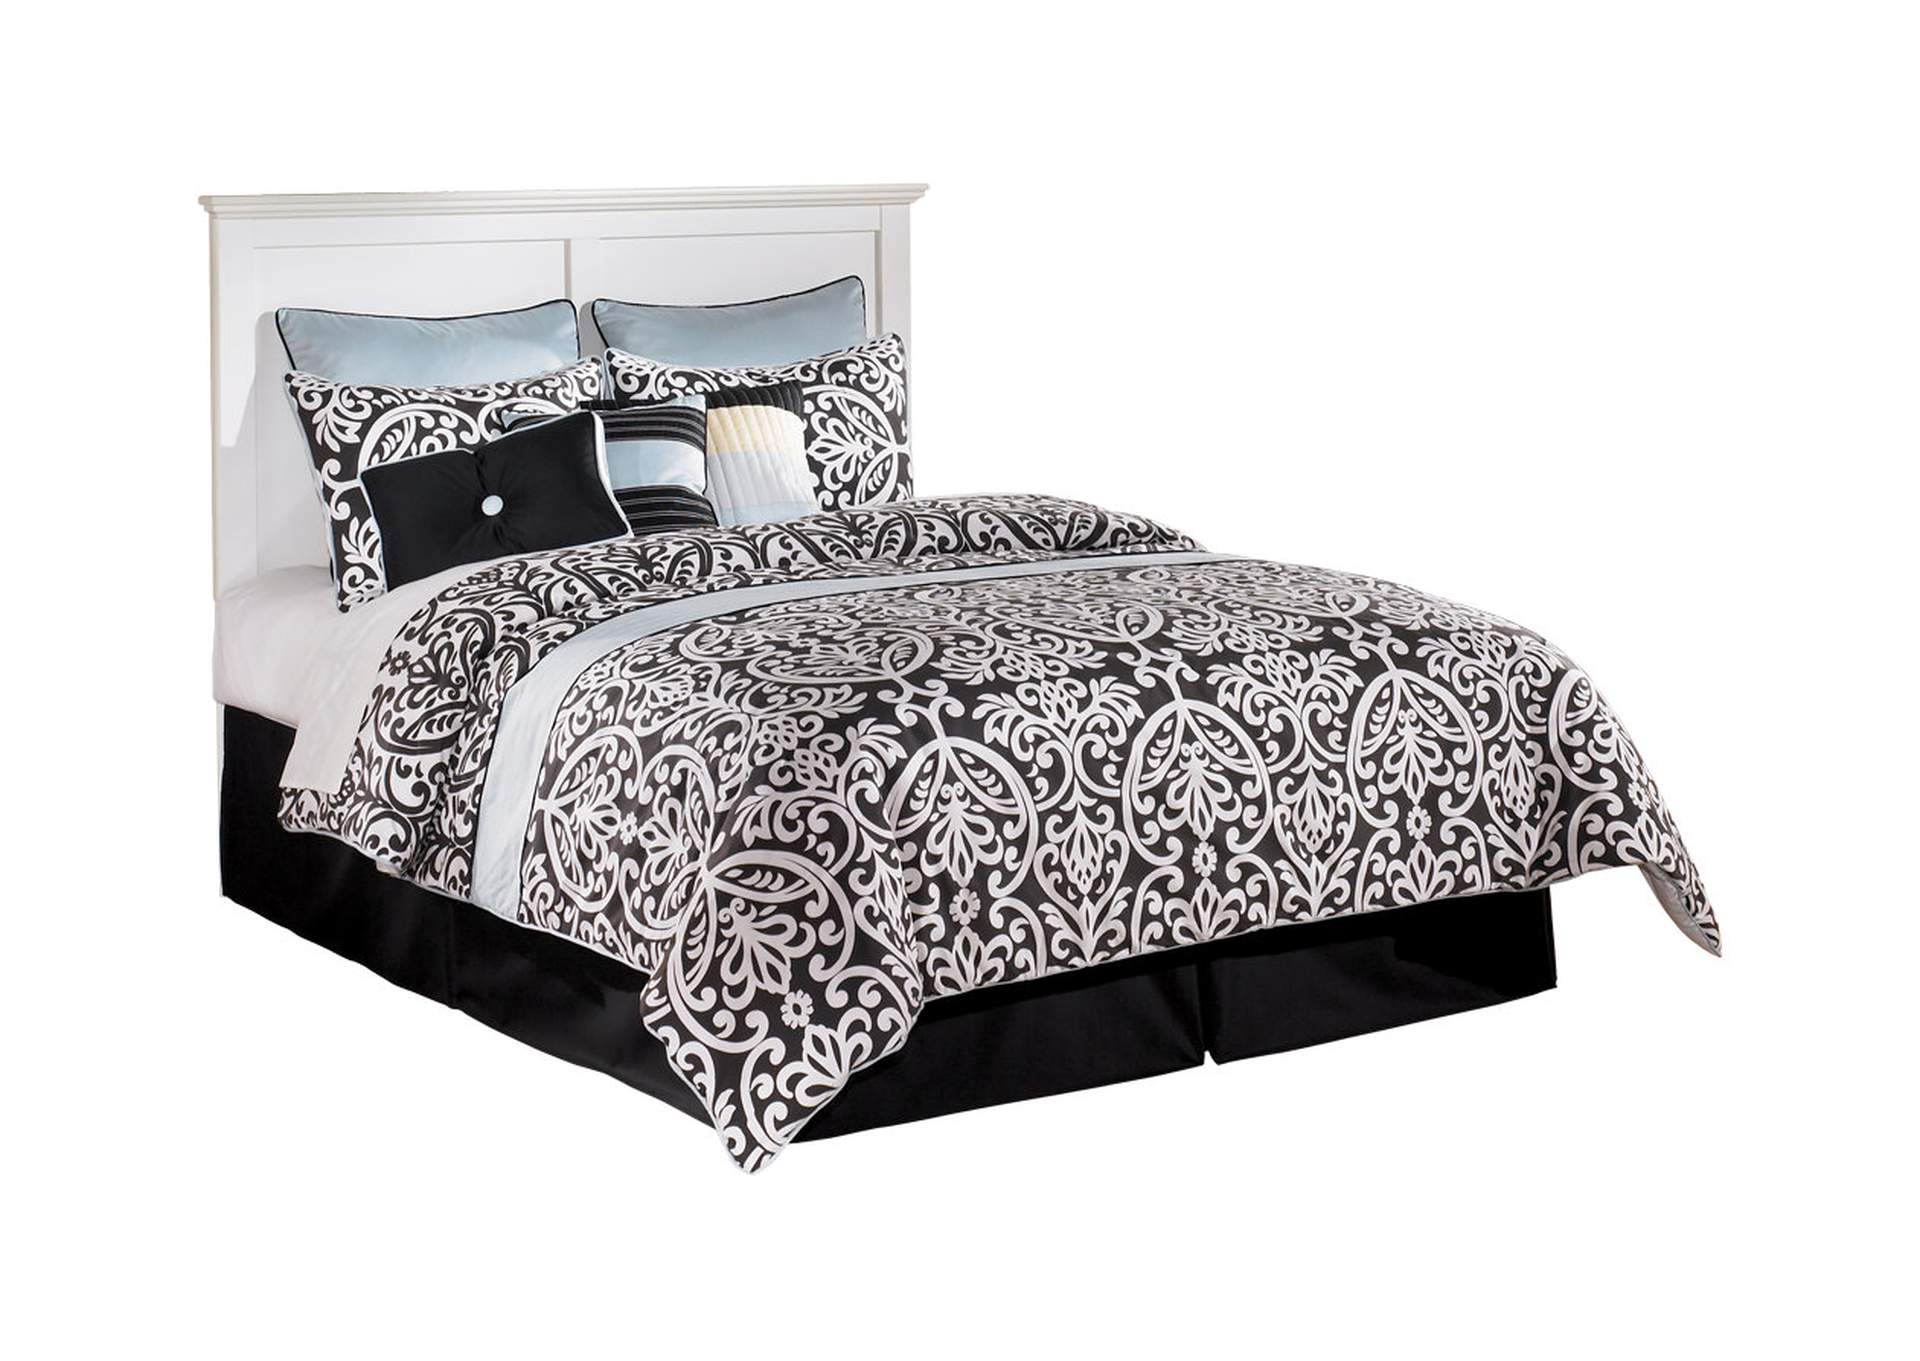 Bostwick Shoals Queen/Full Panel Headboard, Dresser and Mirror,Signature Design By Ashley